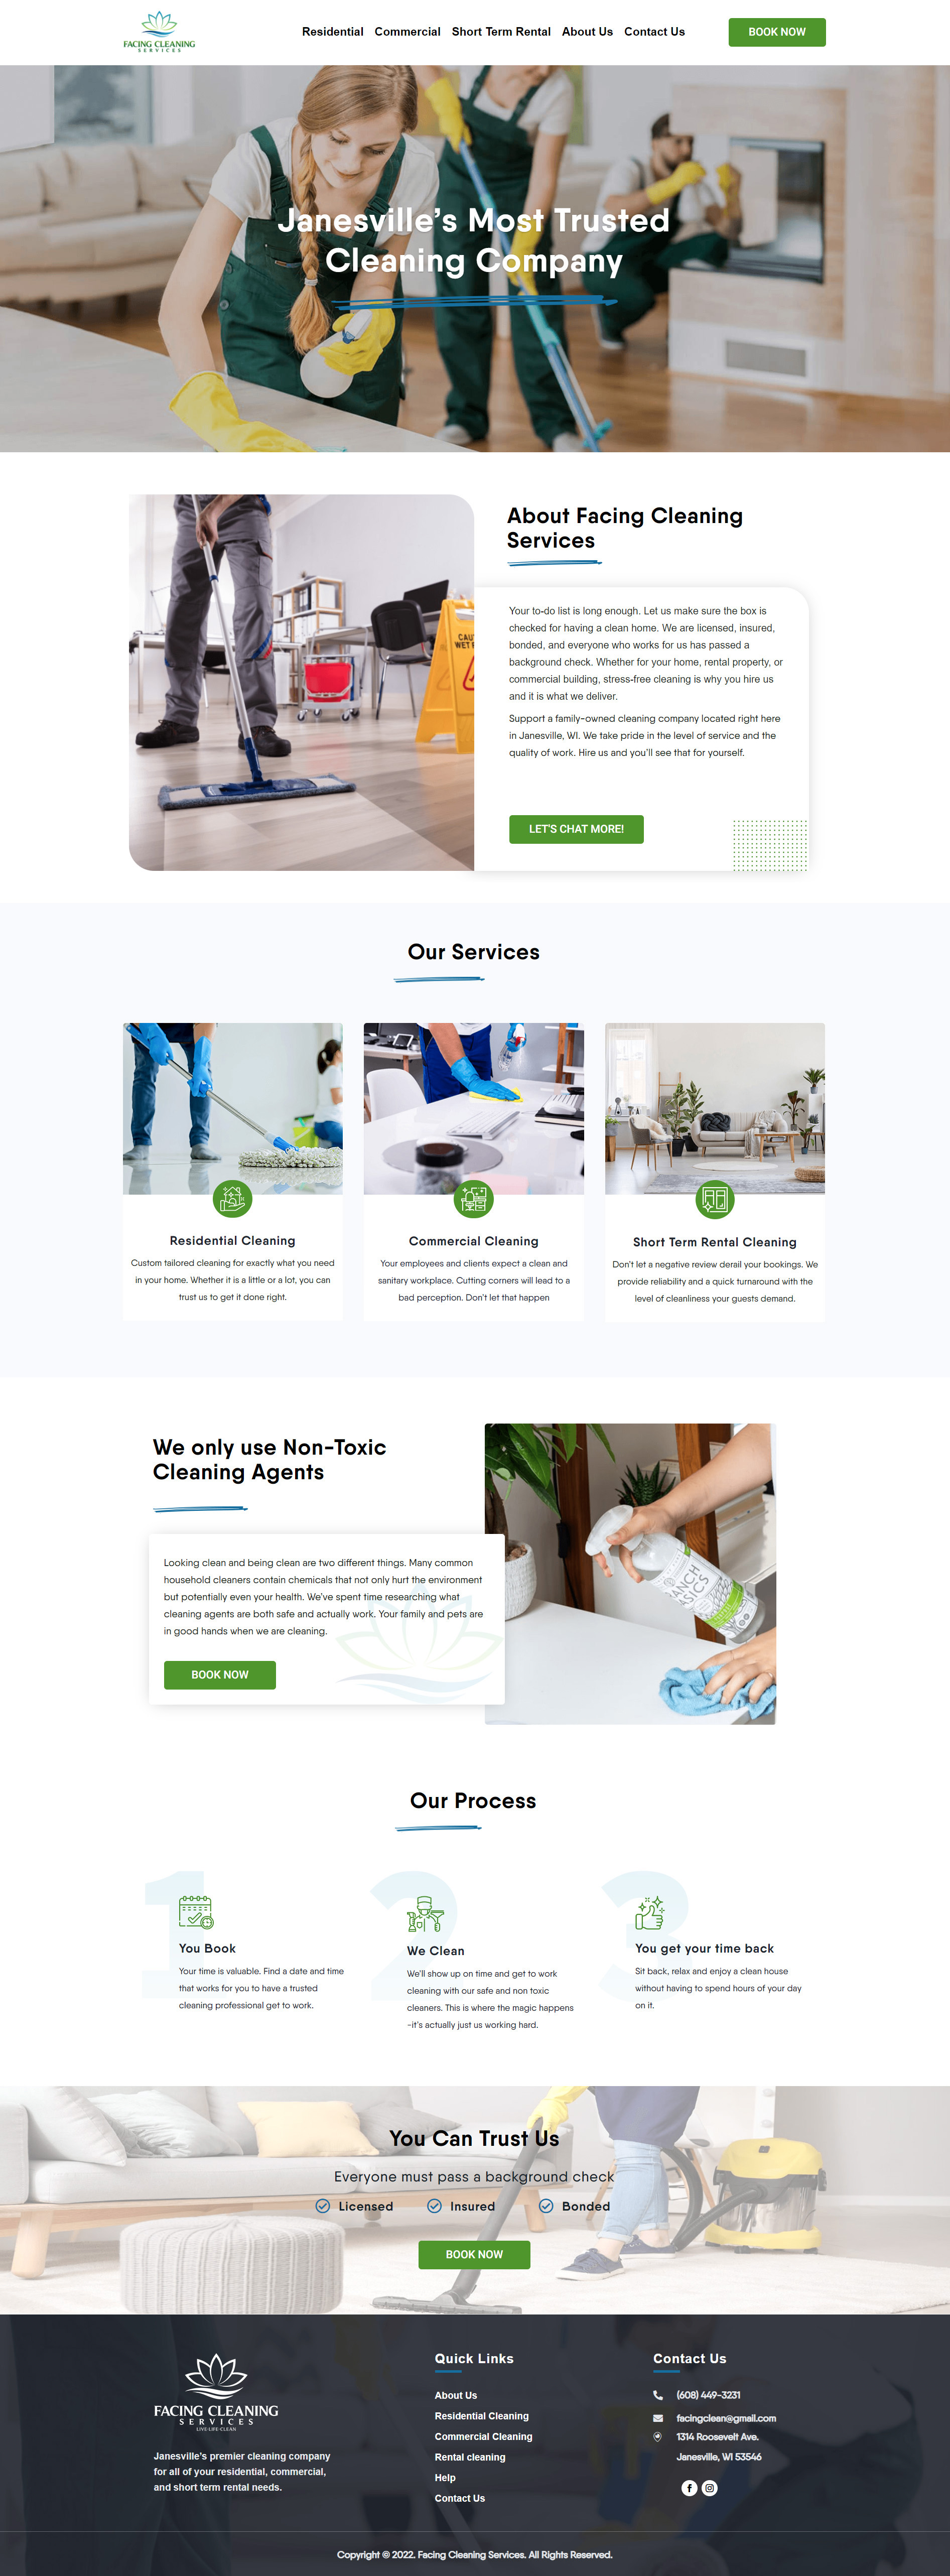 Example of the new and improved WordPress website designed by Foremost Media for Facing Cleaning Services